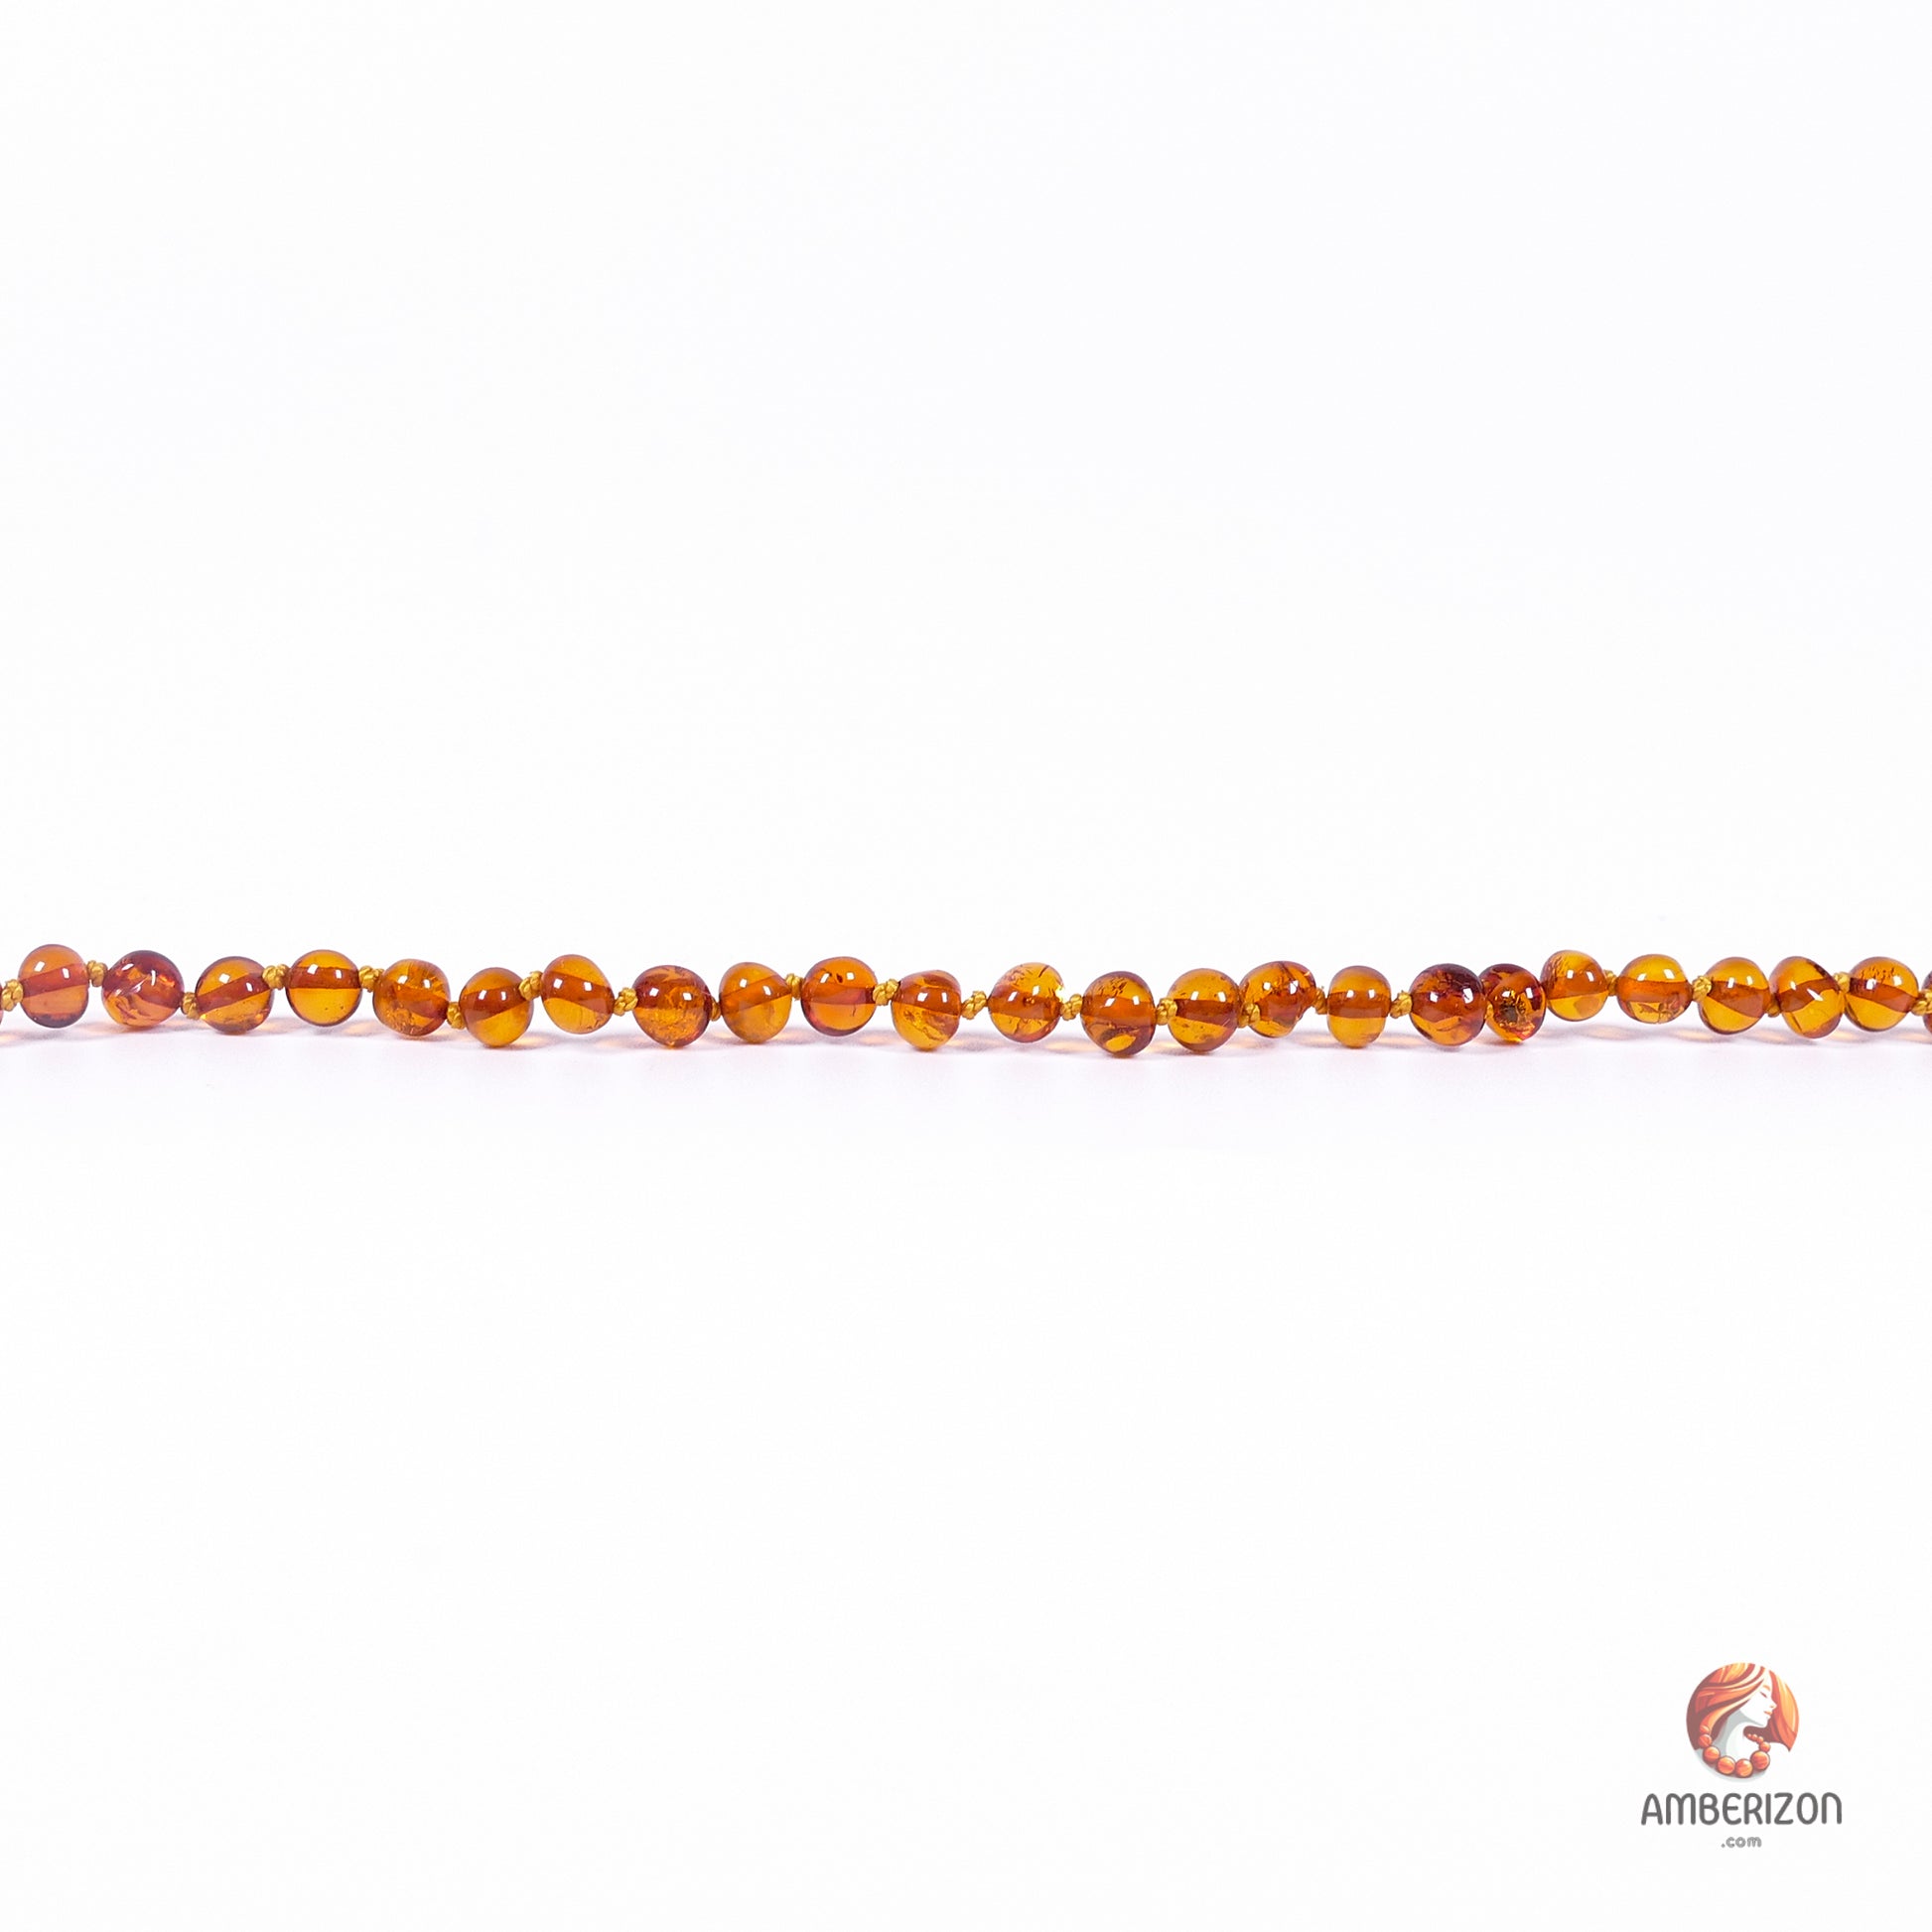 Minimalist women's necklace - Cognac Baroque polished amber beads